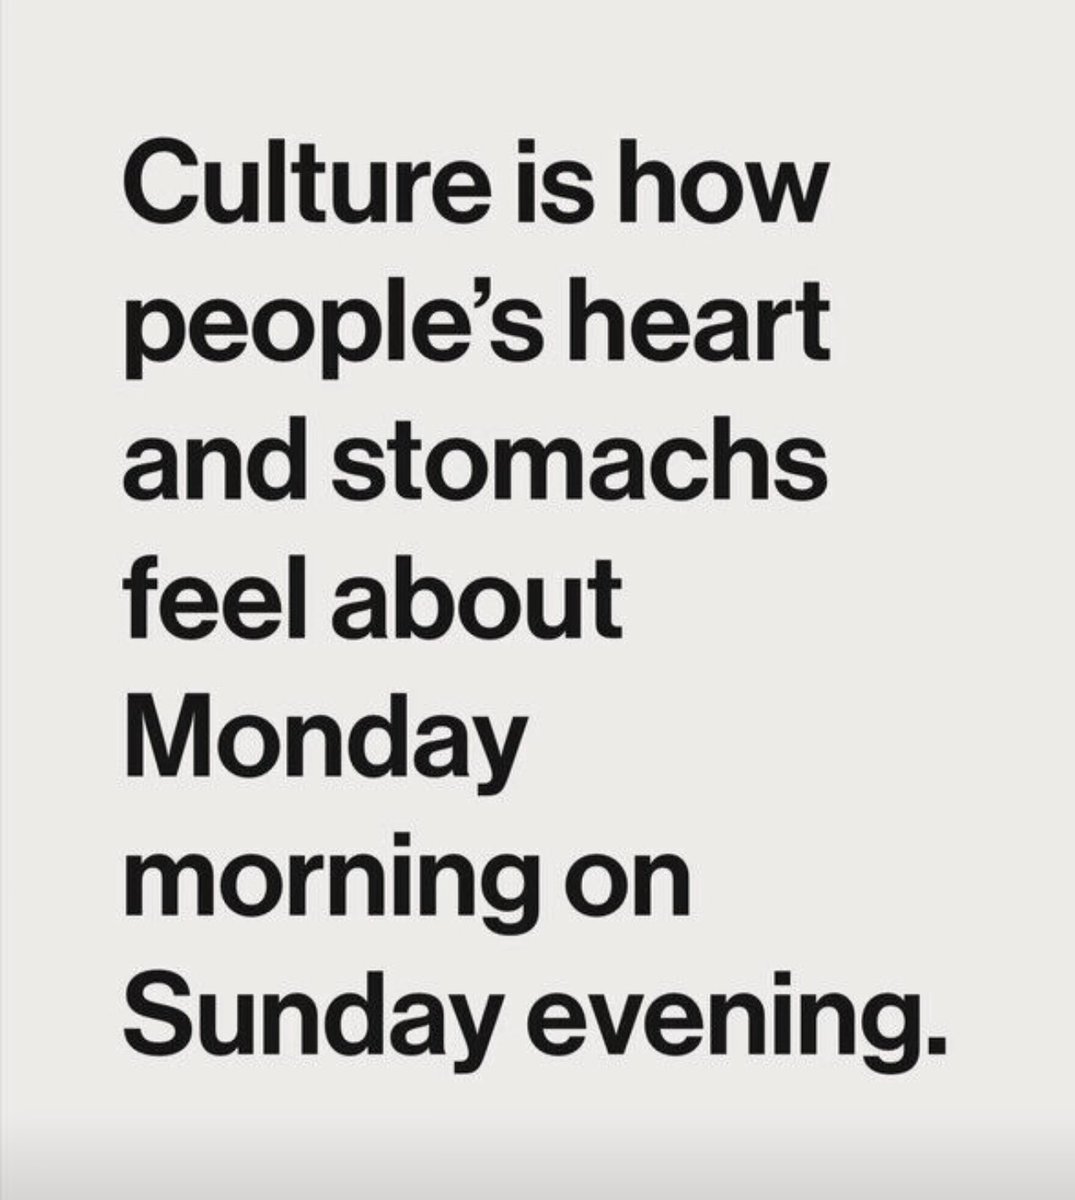 It can be difficult for some people to summarize what organizational culture really means. Think of it as the pit in your stomach or the pep in your step on Monday.
#organizationalculture #pathforwardconsulting #diversityandinclusion #LeadershipMatters